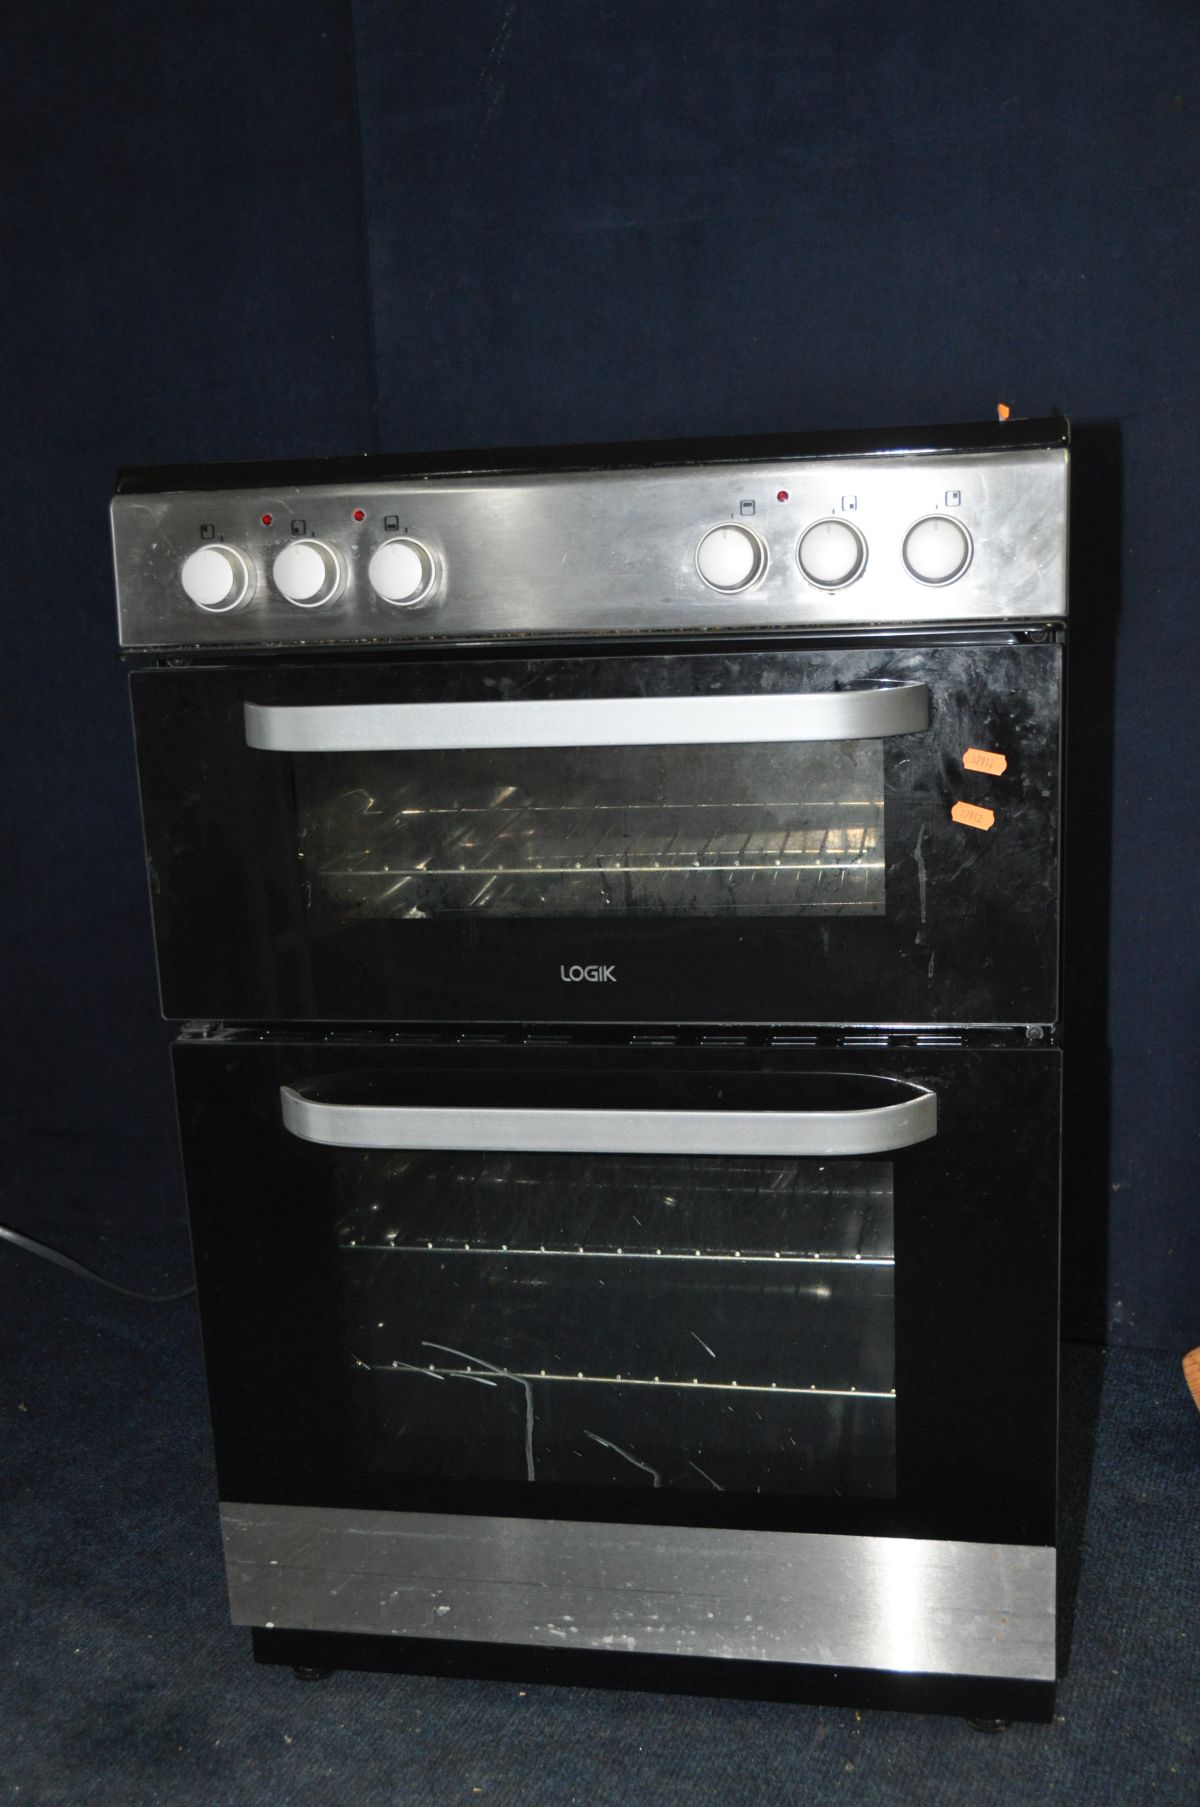 A LOGIK ELECTRIC COOKER model No LDOC60X17 (PAT pass and working)